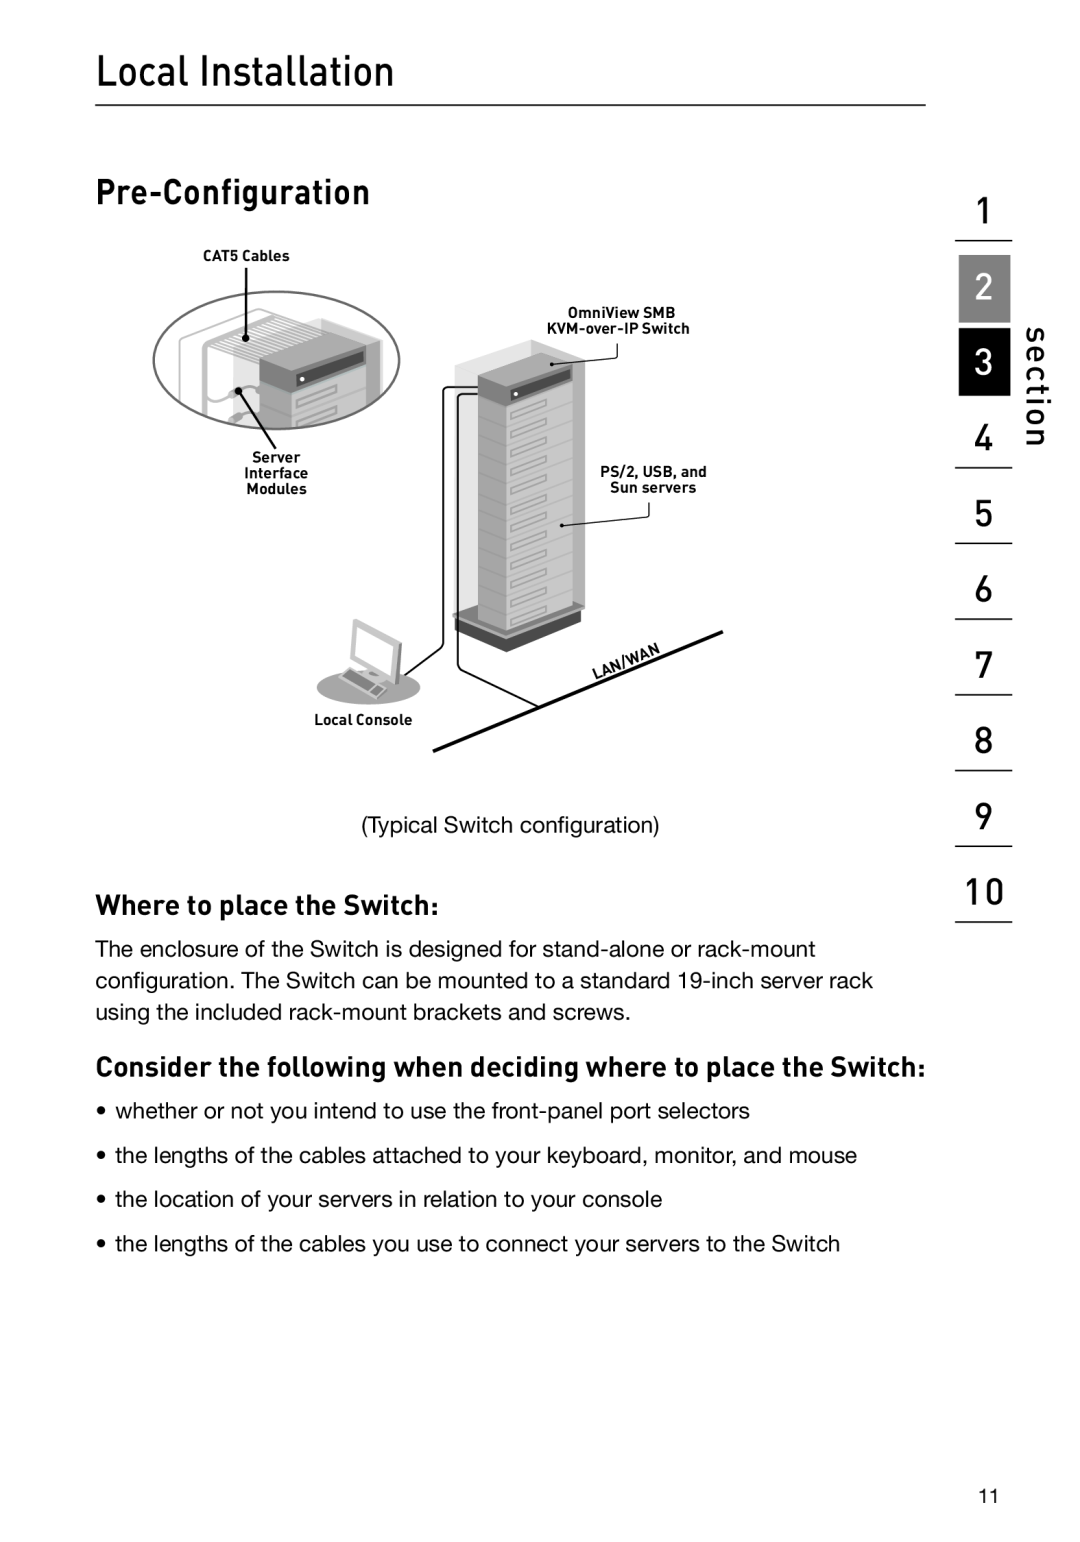 Belkin F1DP108G user manual Local Installation, Pre-Configuration, Where to place the Switch, section 